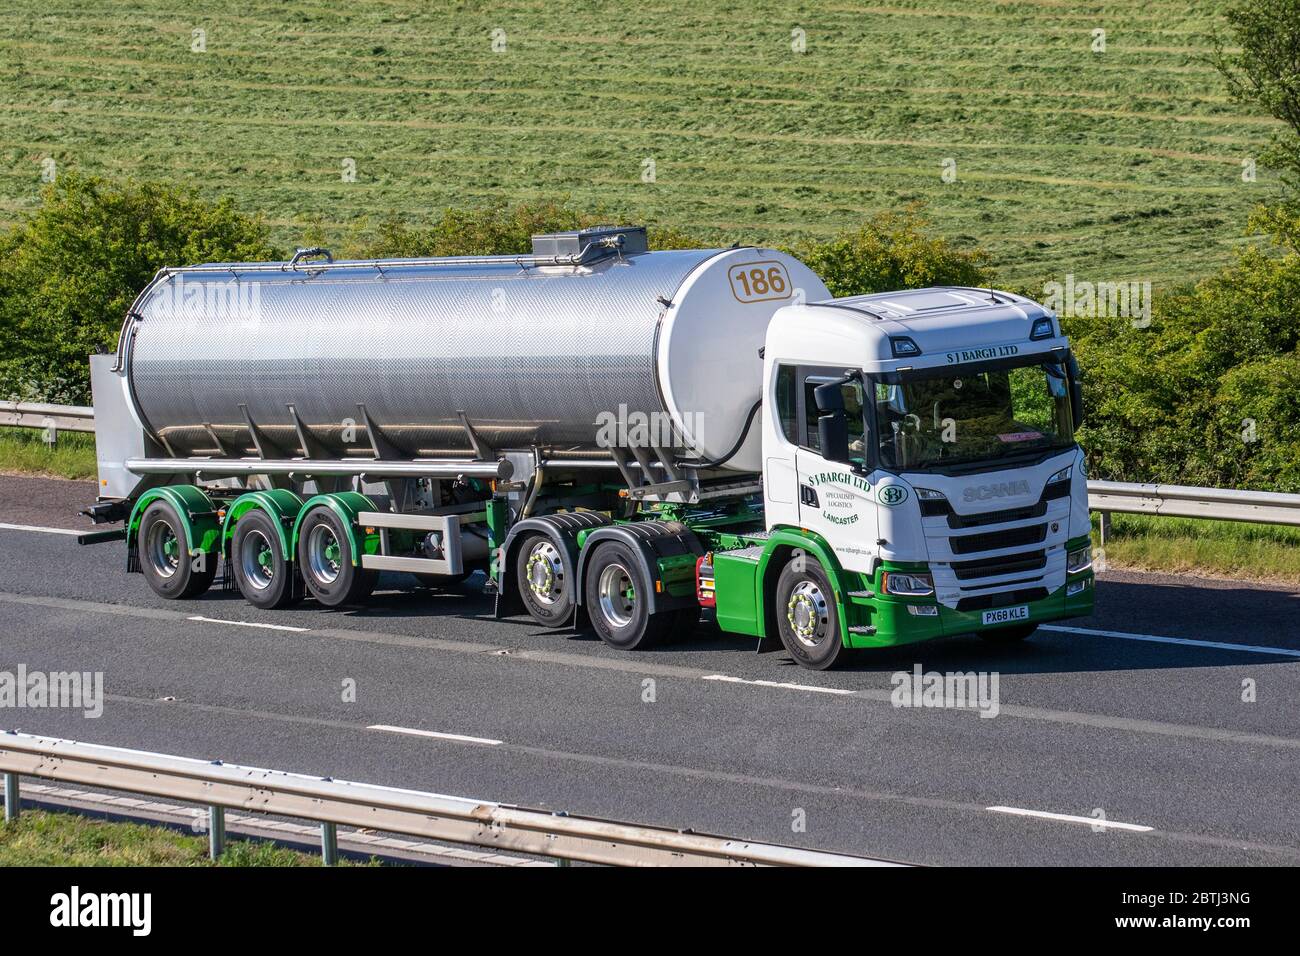 S J Bargh Tanker Hgv Haulage Delivery Trucks Lorry Transportation Truck Cargo Carrier Vehicle European Commercial Transport Industry Distribution Service M6 At Manchester Uk Stock Photo Alamy